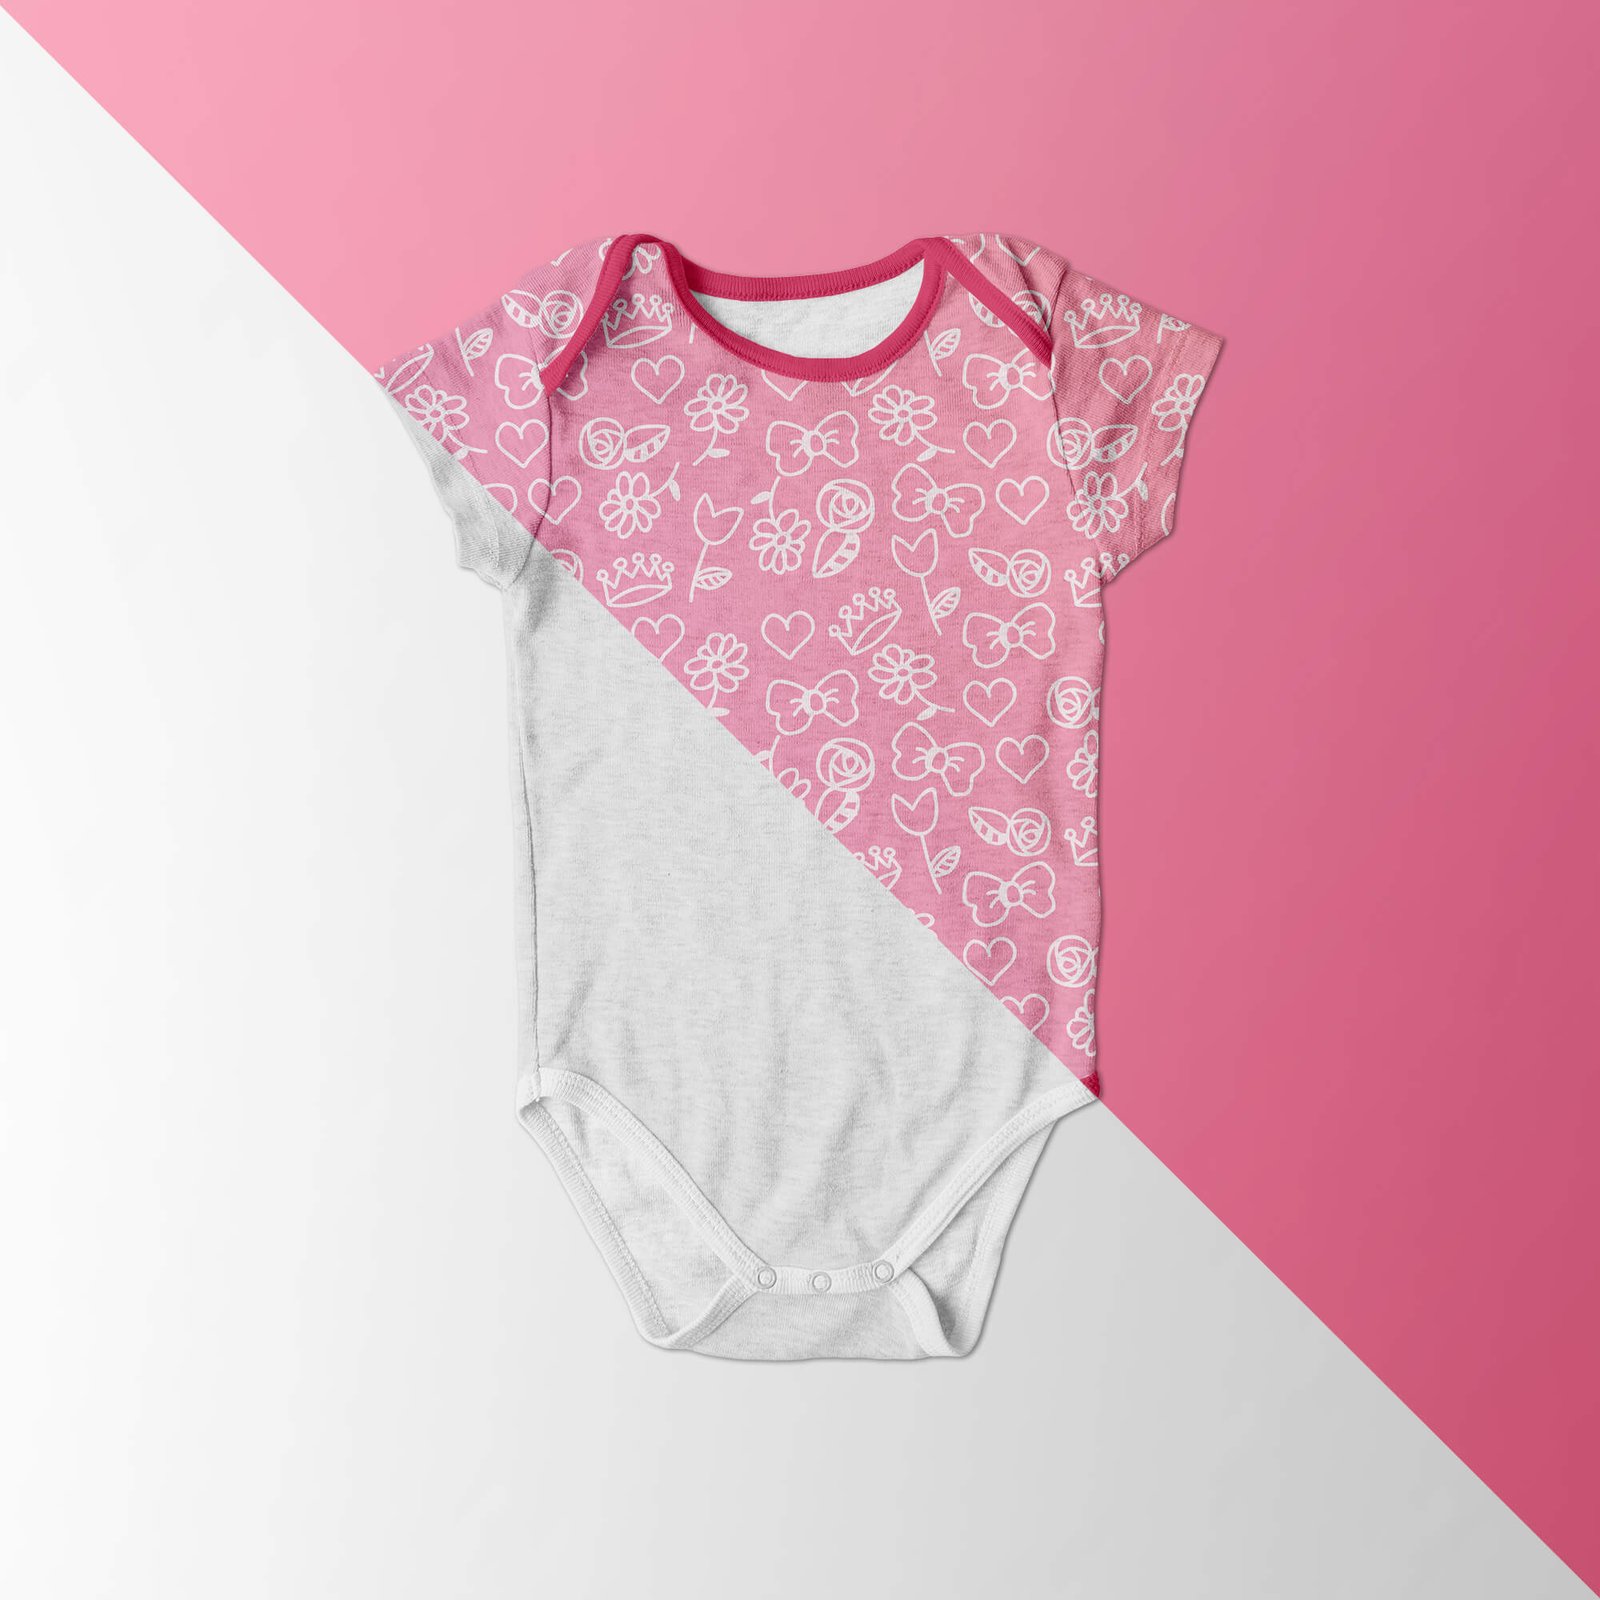 Editable Free Baby Clothes Mockup PSD Template